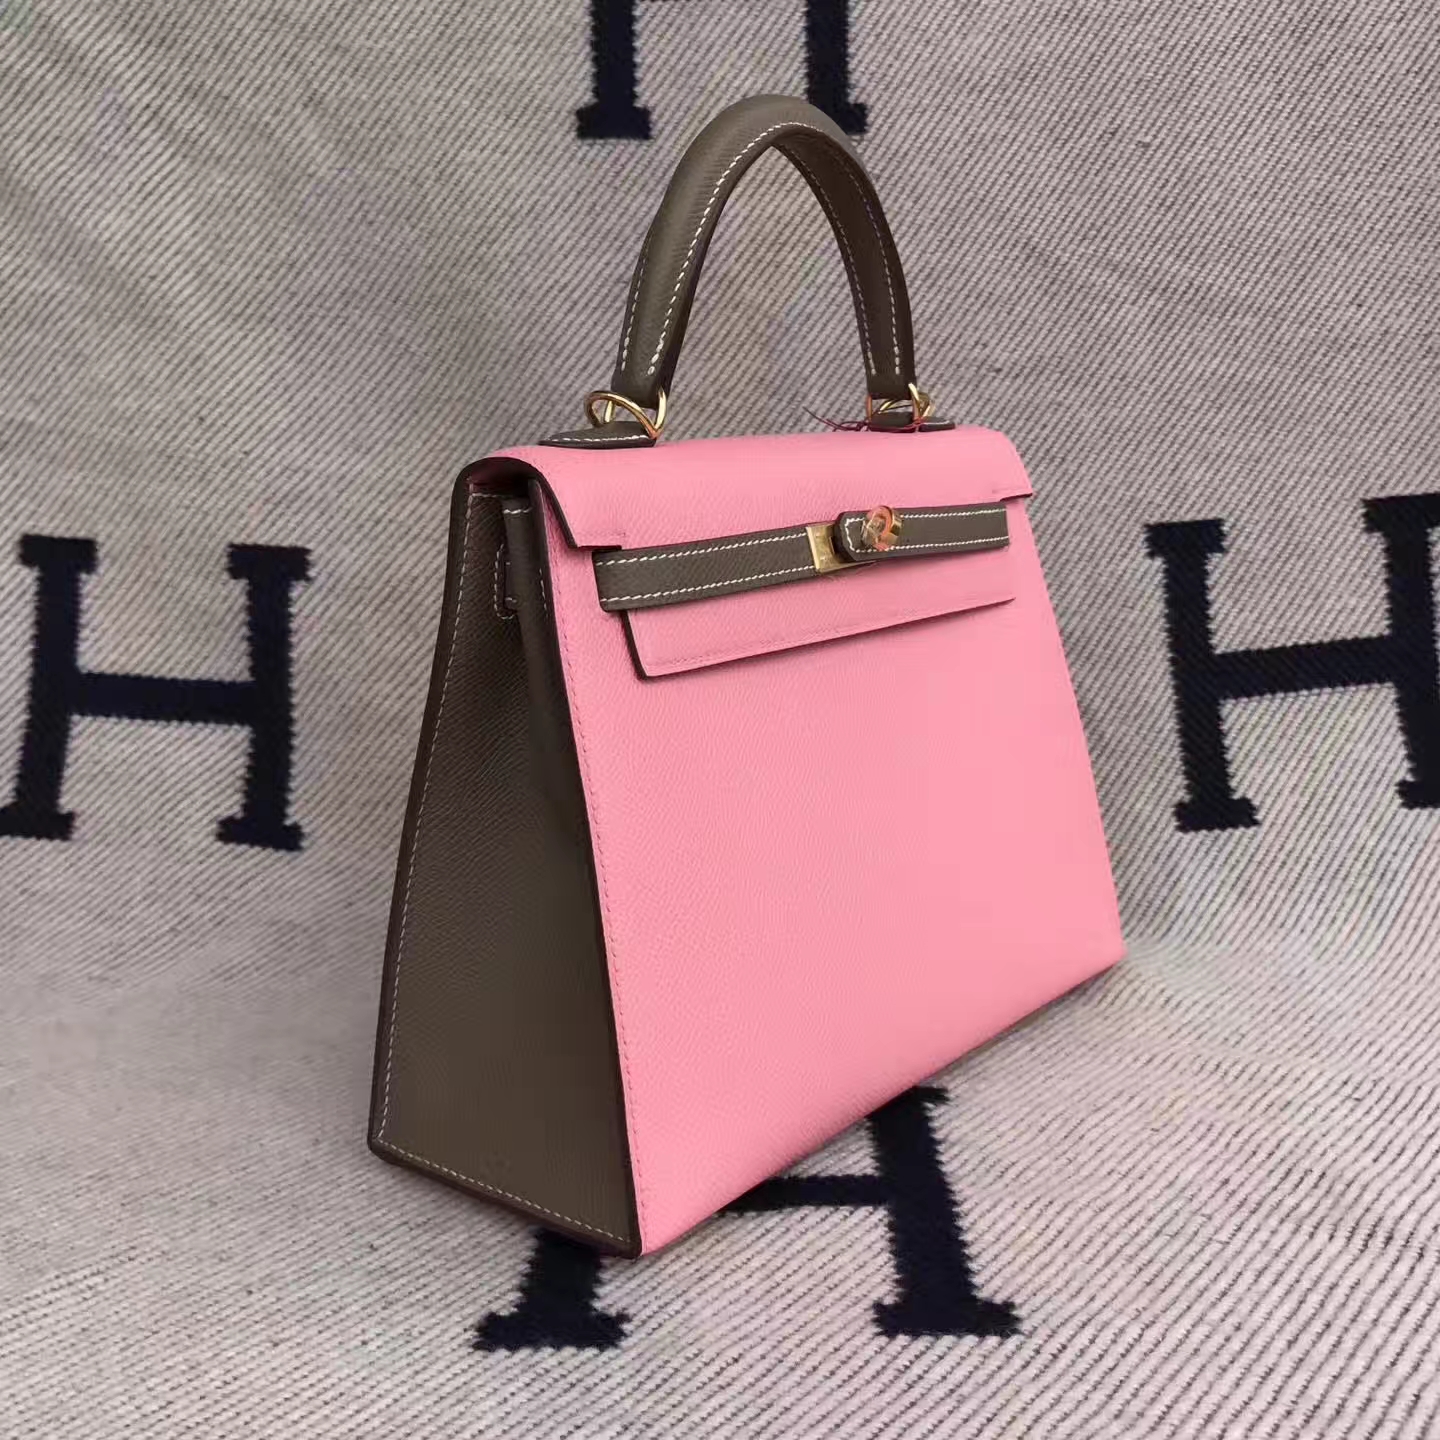 Hand Stitching Hermes Double-color Epsom Calfskin Sellier Kelly28cm Tote Bag